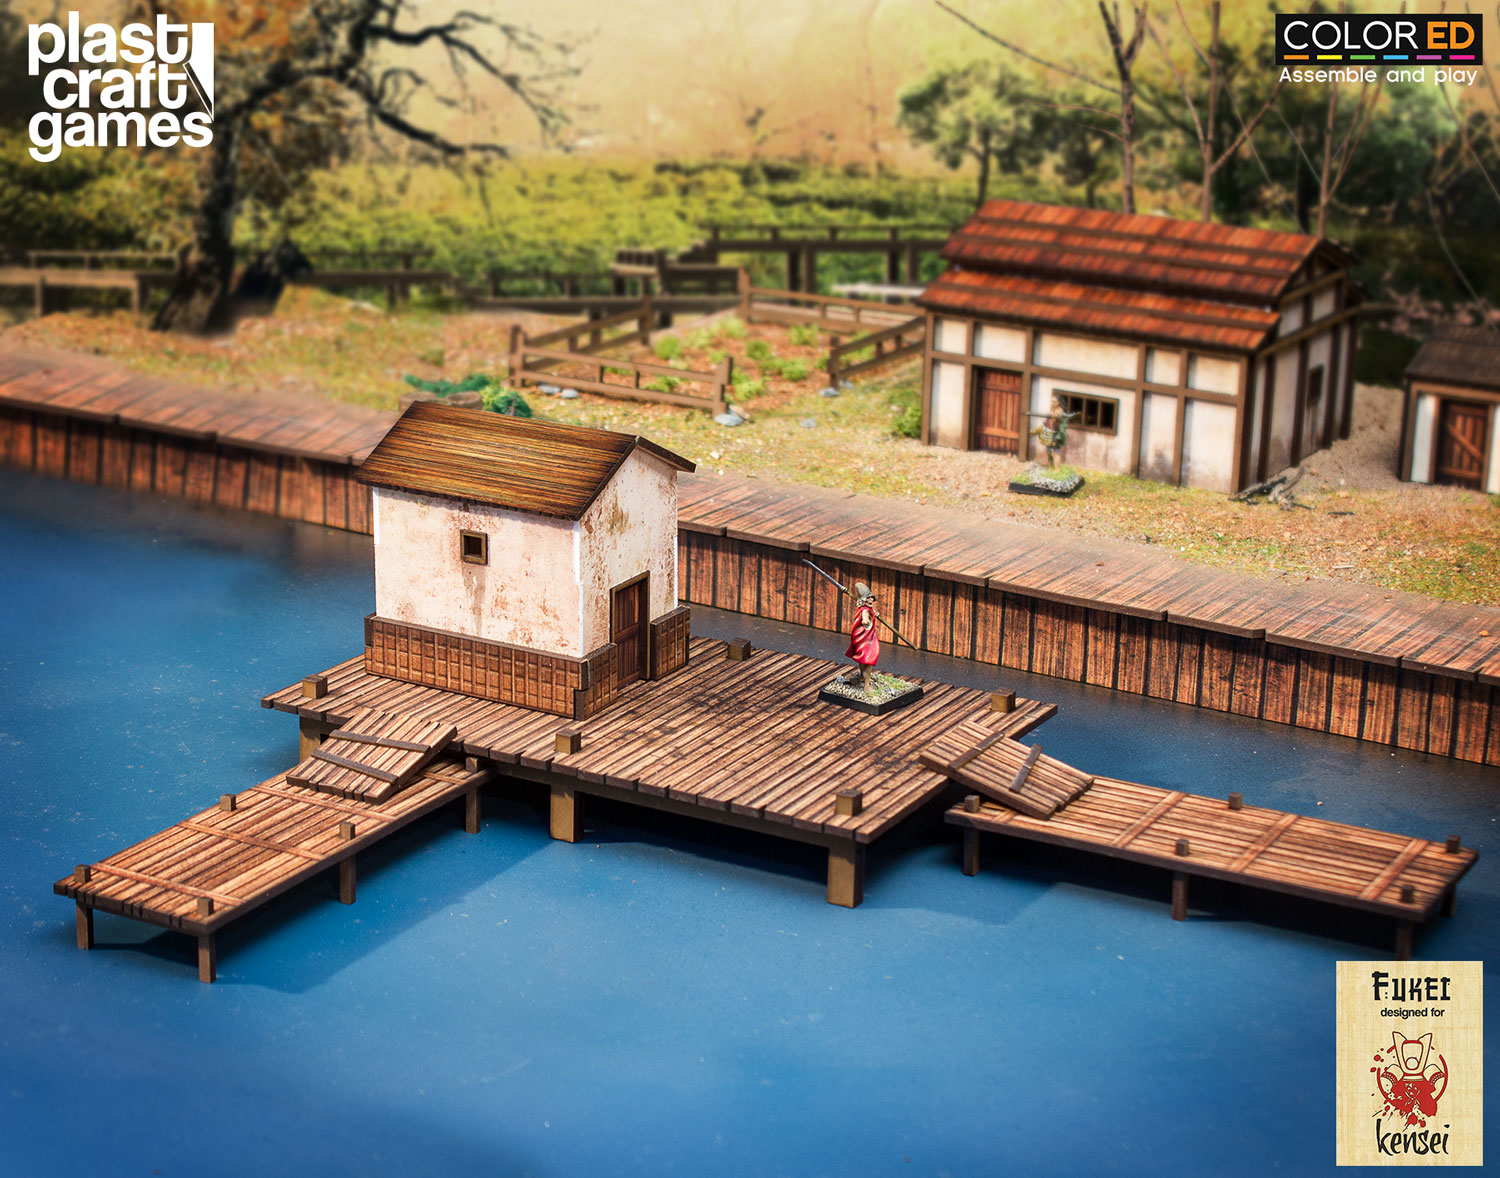 PlastCraft Games Exclusive! New Color-ED Kensei Terrain Available